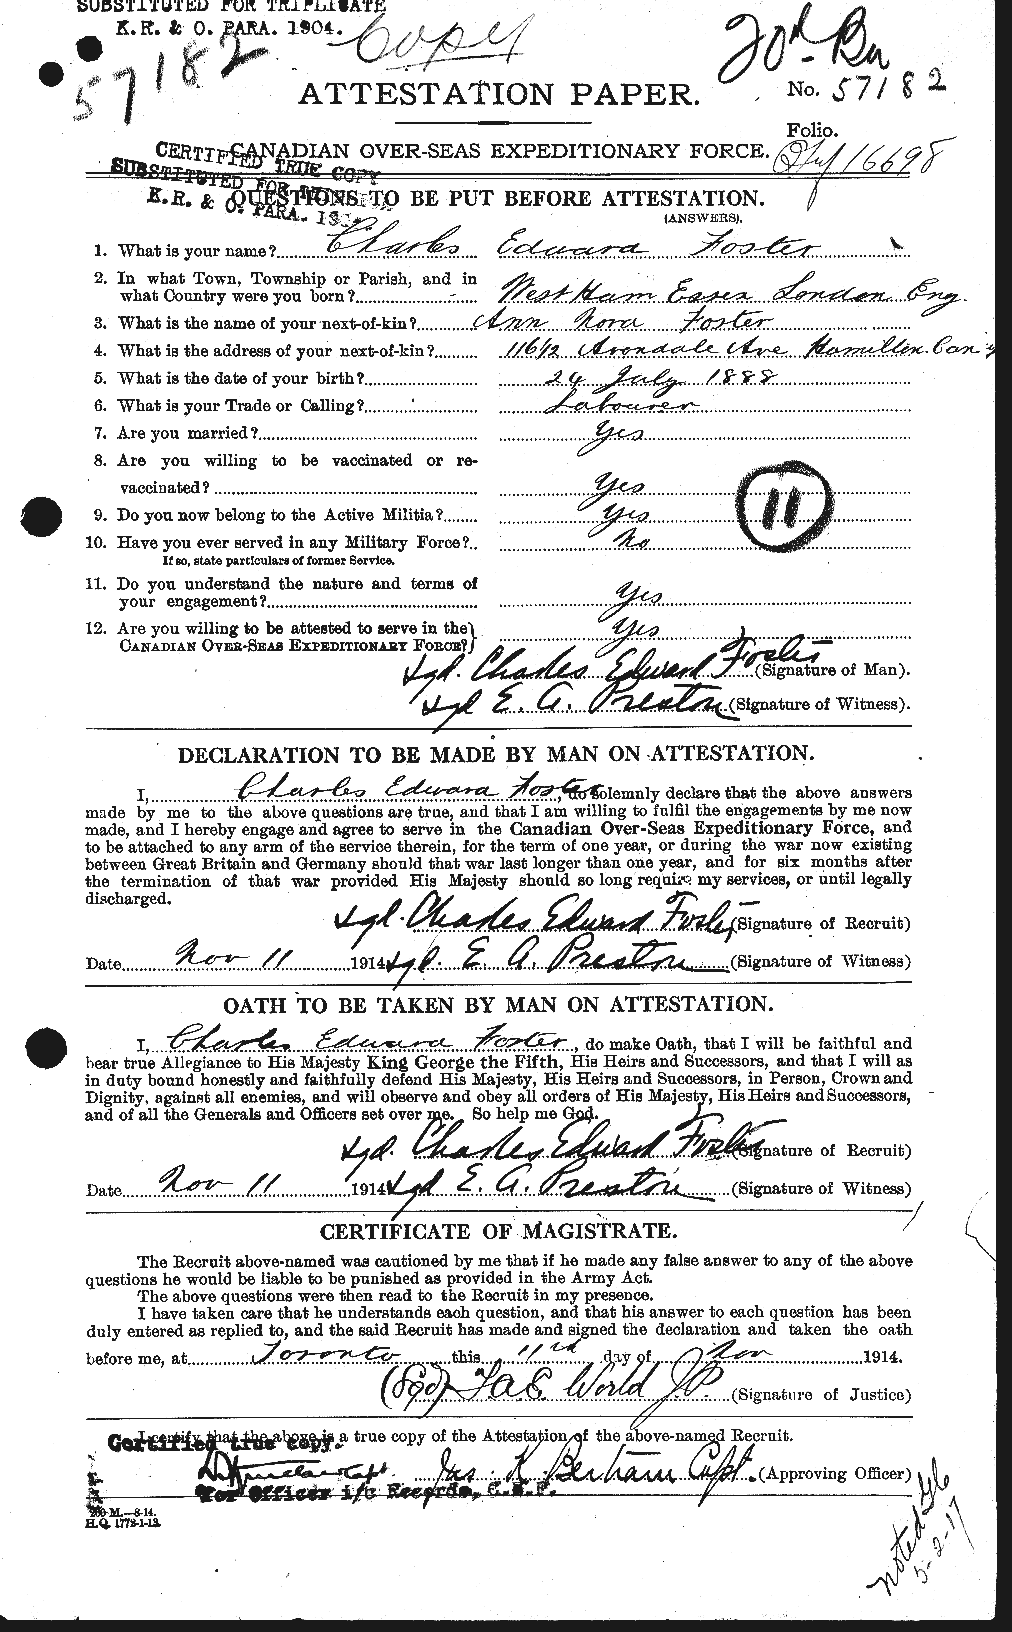 Personnel Records of the First World War - CEF 330509a